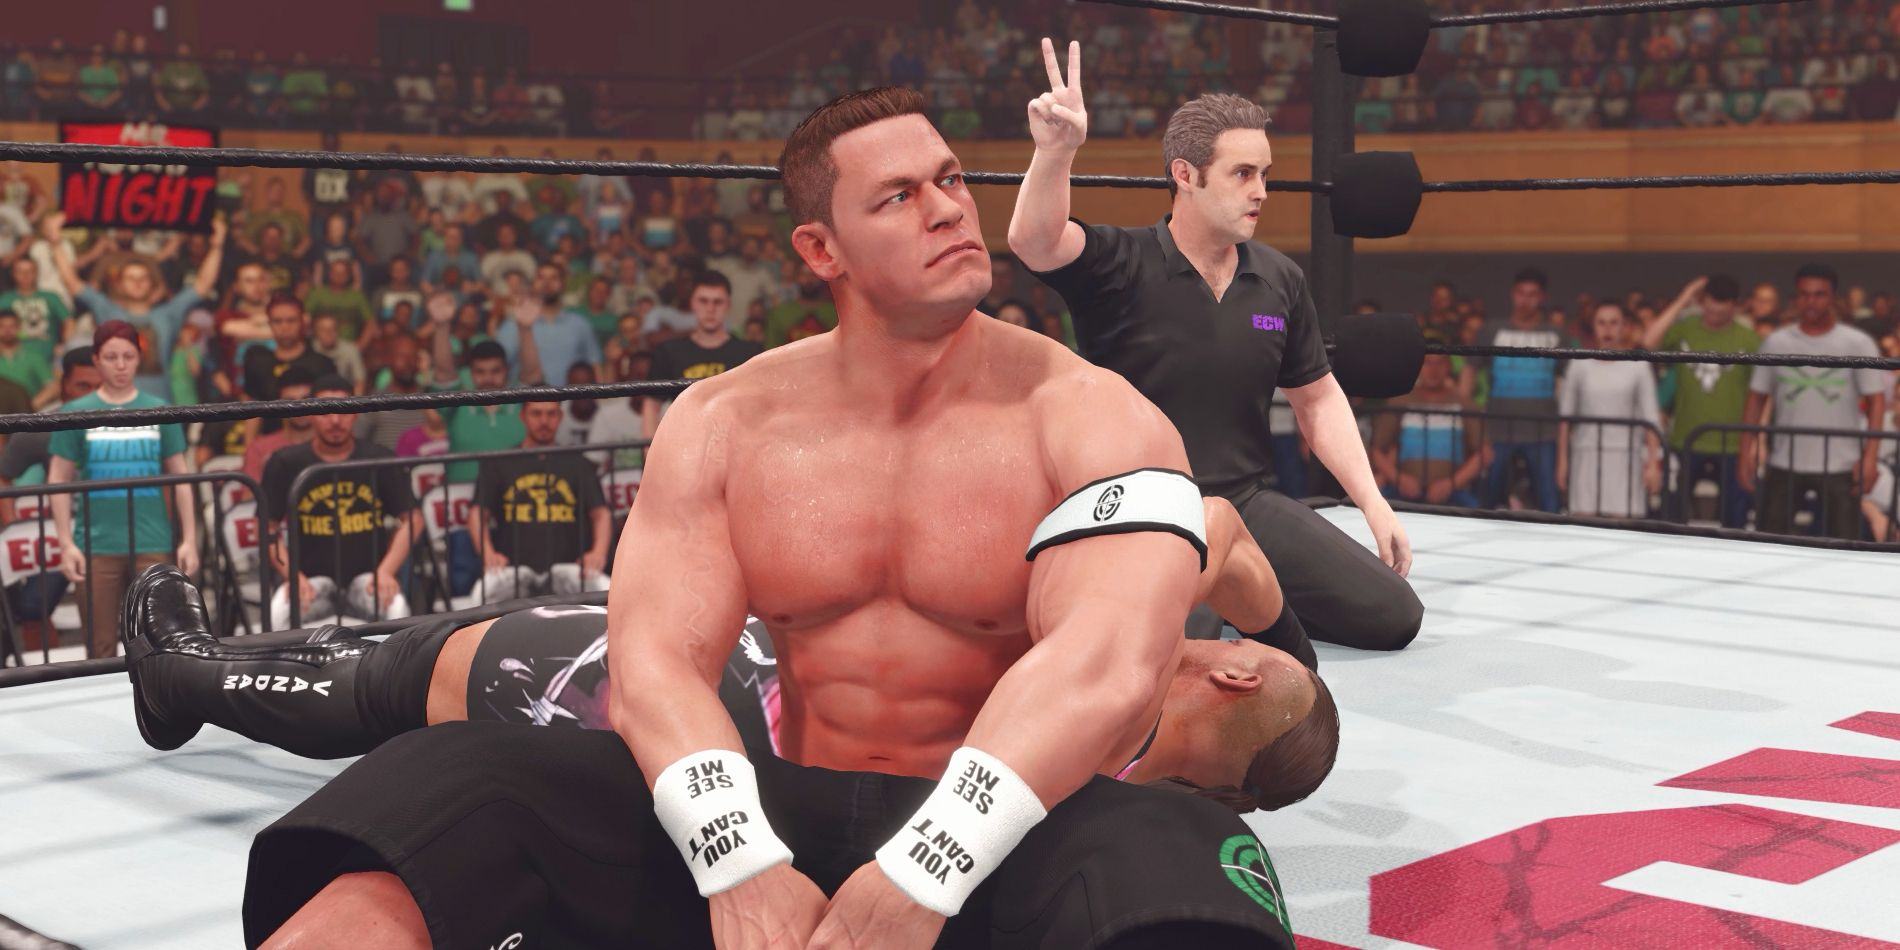 Wrestler John Cena appeared frustrated in the ring with RVD after his opponent escaped on a count of two.  The referee is seen holding up two fingers at the back.